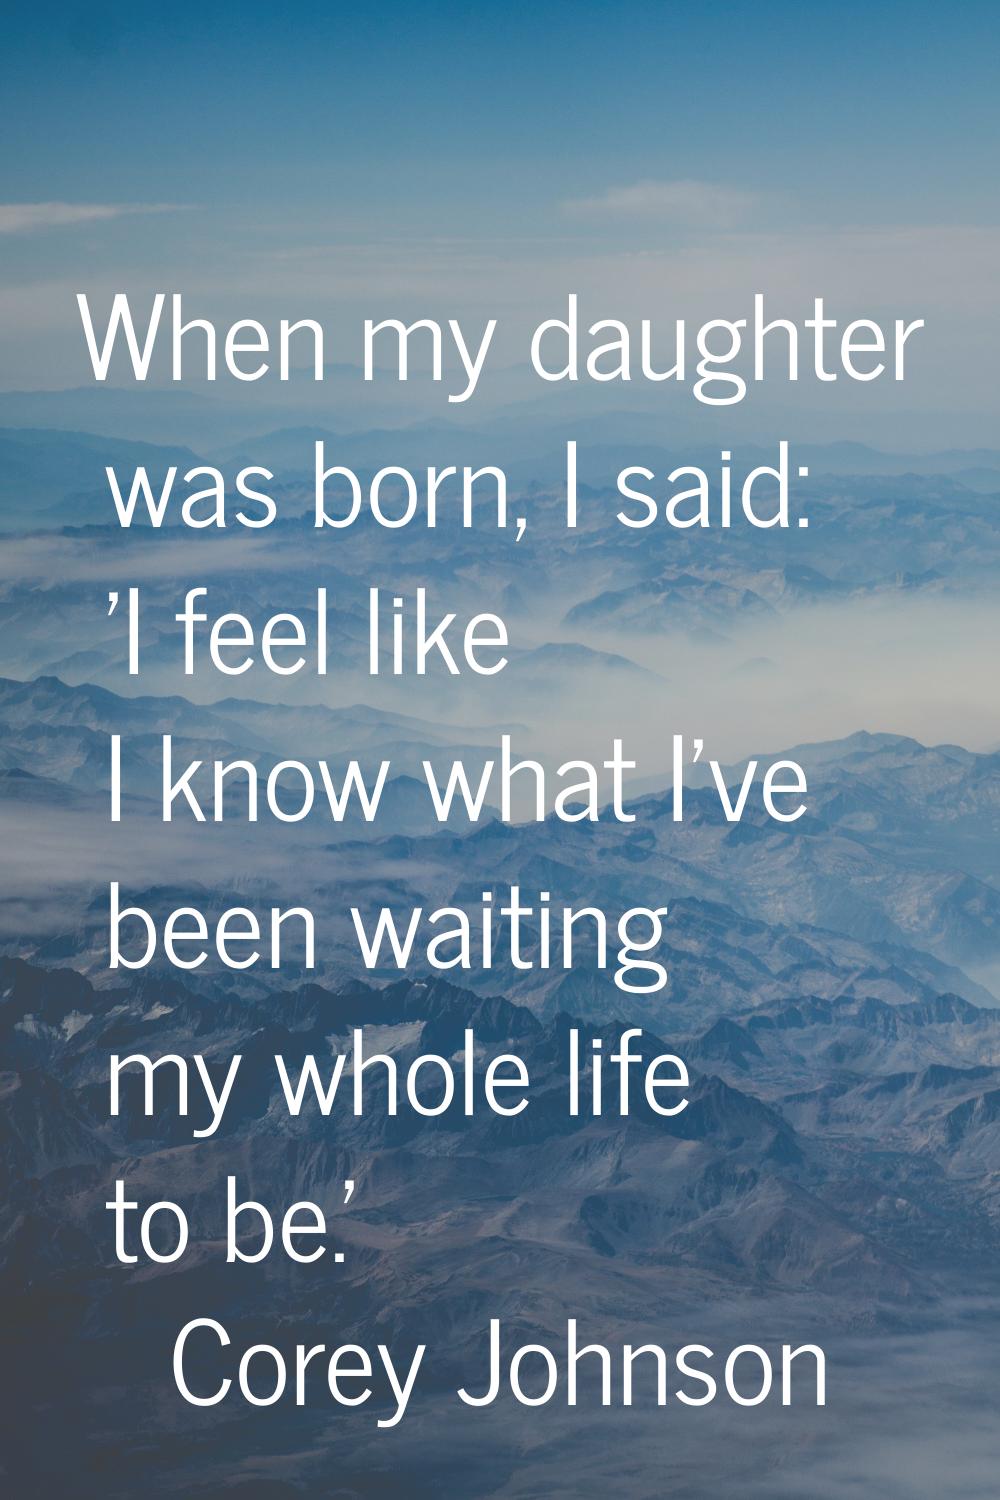 When my daughter was born, I said: 'I feel like I know what I've been waiting my whole life to be.'